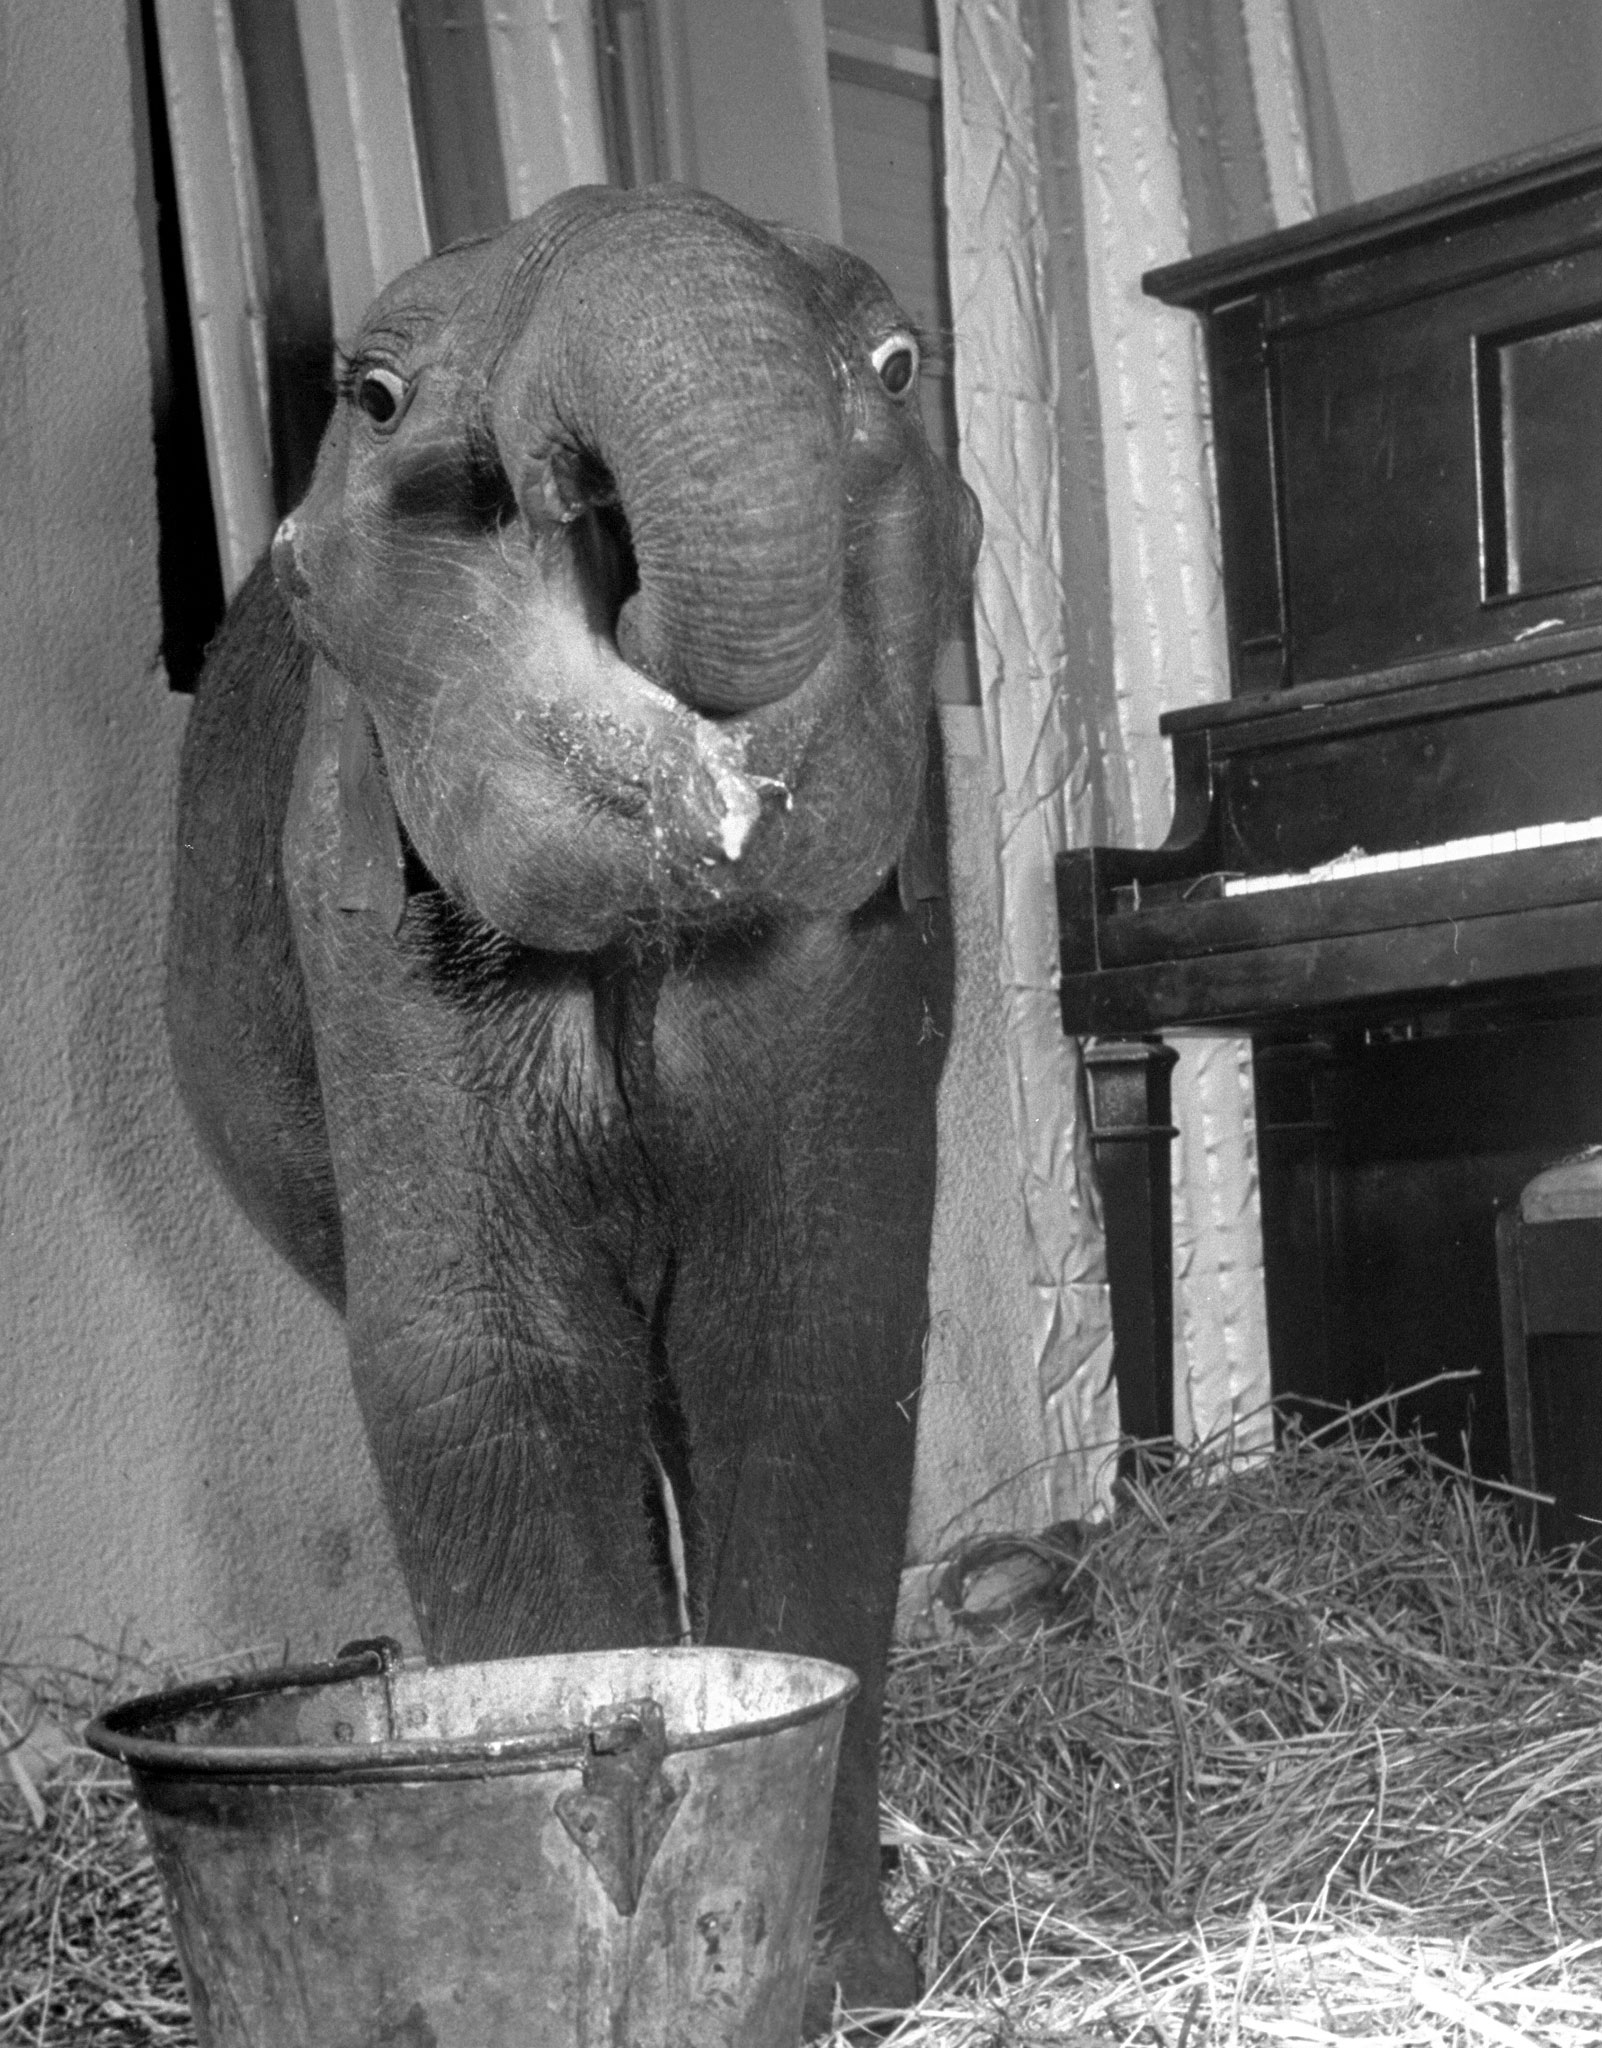 "Butch", baby female Indian elephant in the Dailey Circus, at feeding time.